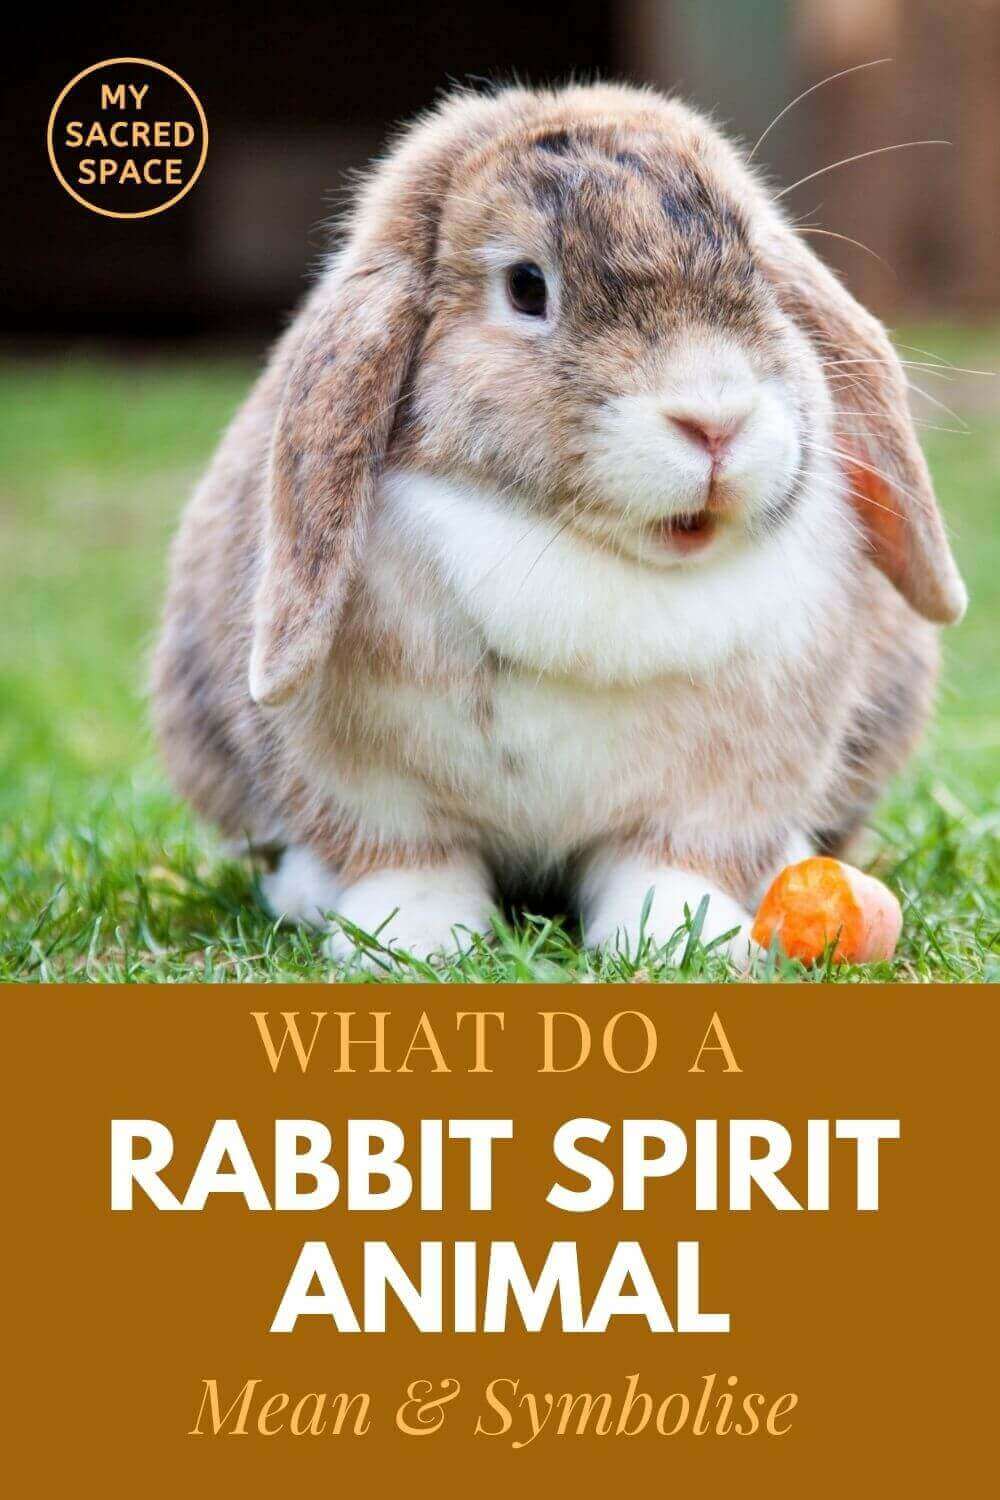 What Does a Rabbit Spirit Animal Mean and Symbolize? - My Sacred Space  Design